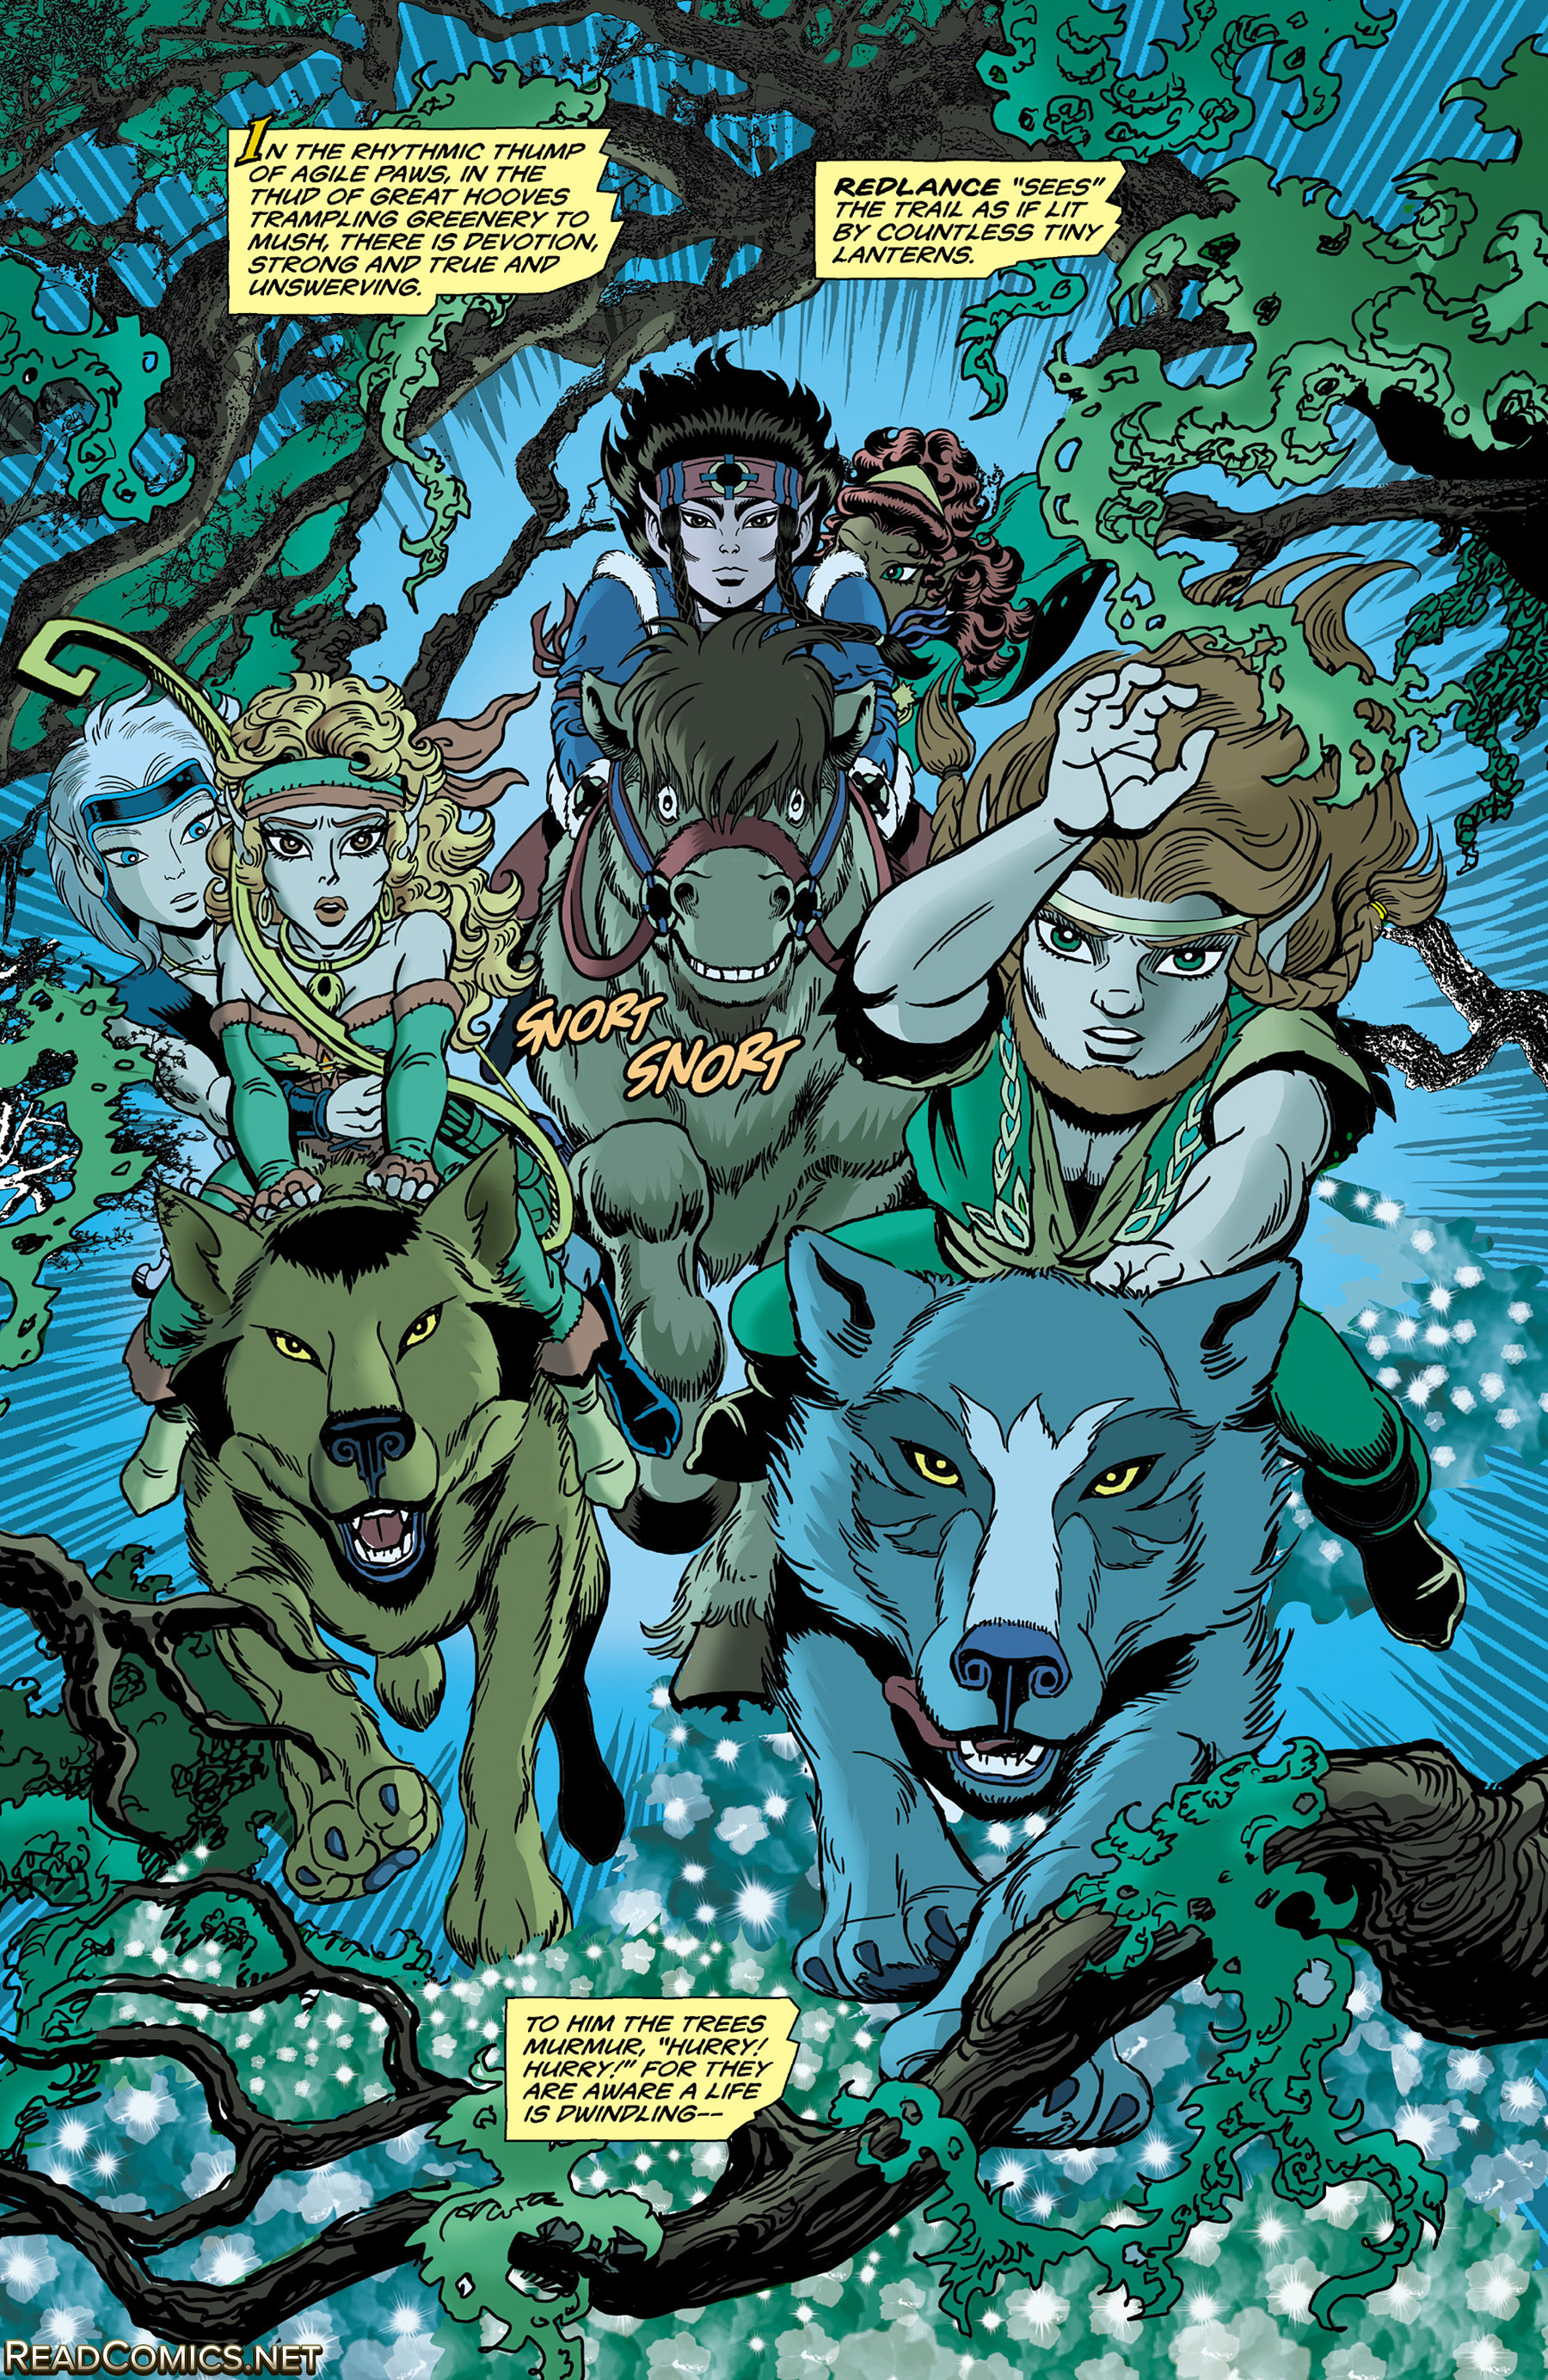 Elfquest: The Final Quest (2015-): Chapter 15 - Page 3